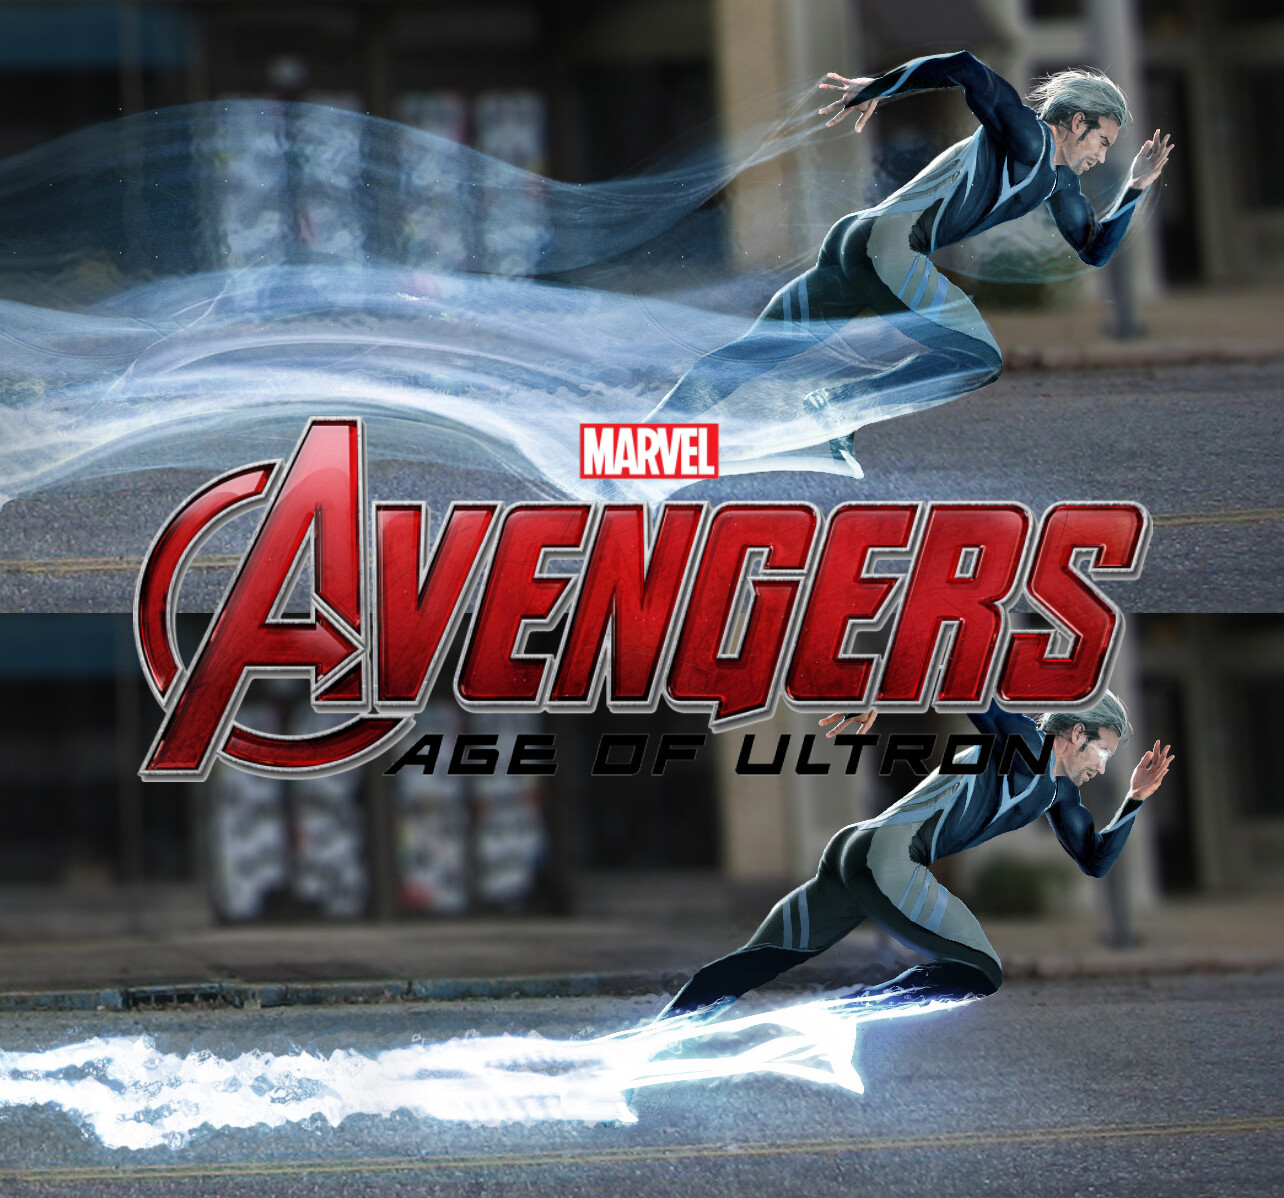 "Avengers: Age of Ultron": Concepts for Quicksilver's trail